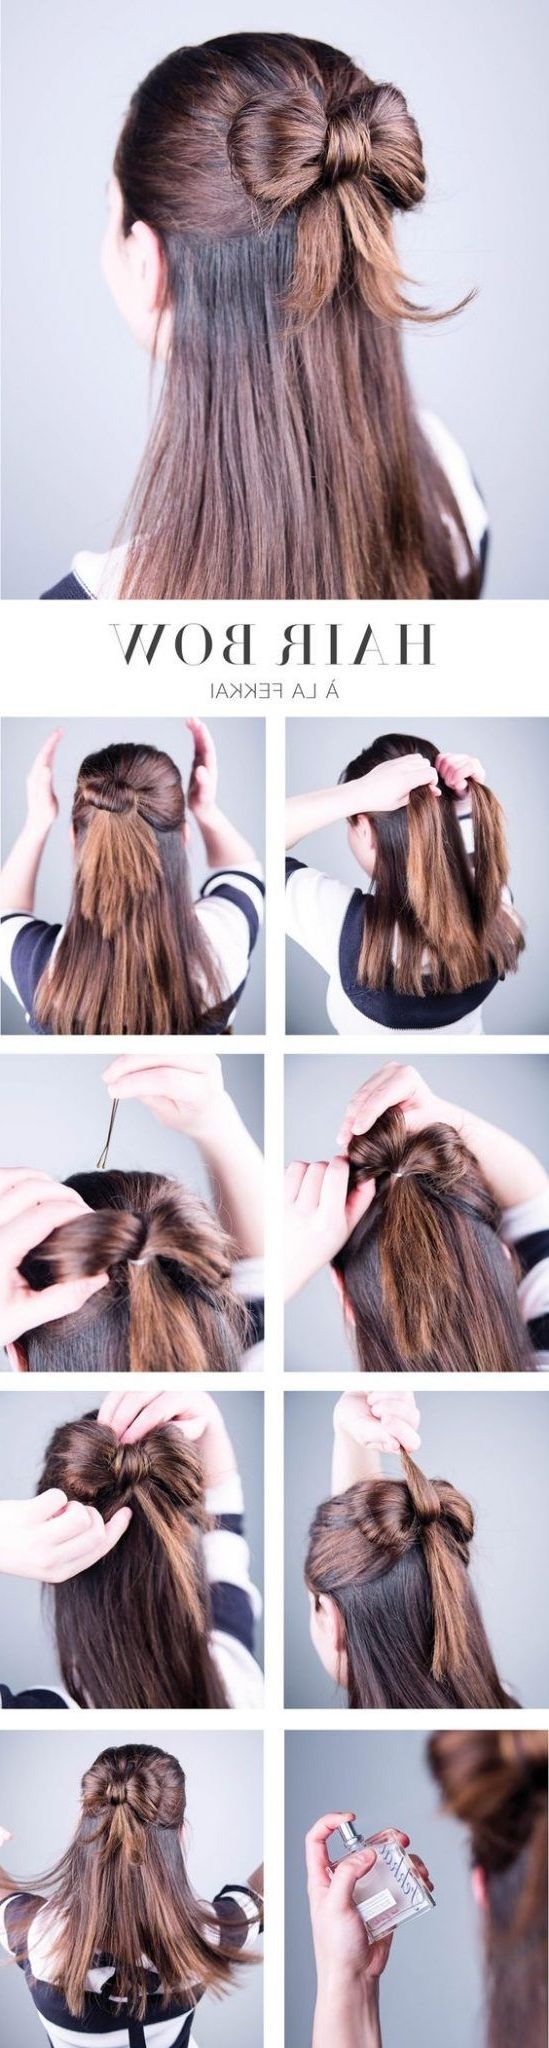 Fryzury Pertaining To Most Recent Thin Double Braids With Bold Bow (View 2 of 15)